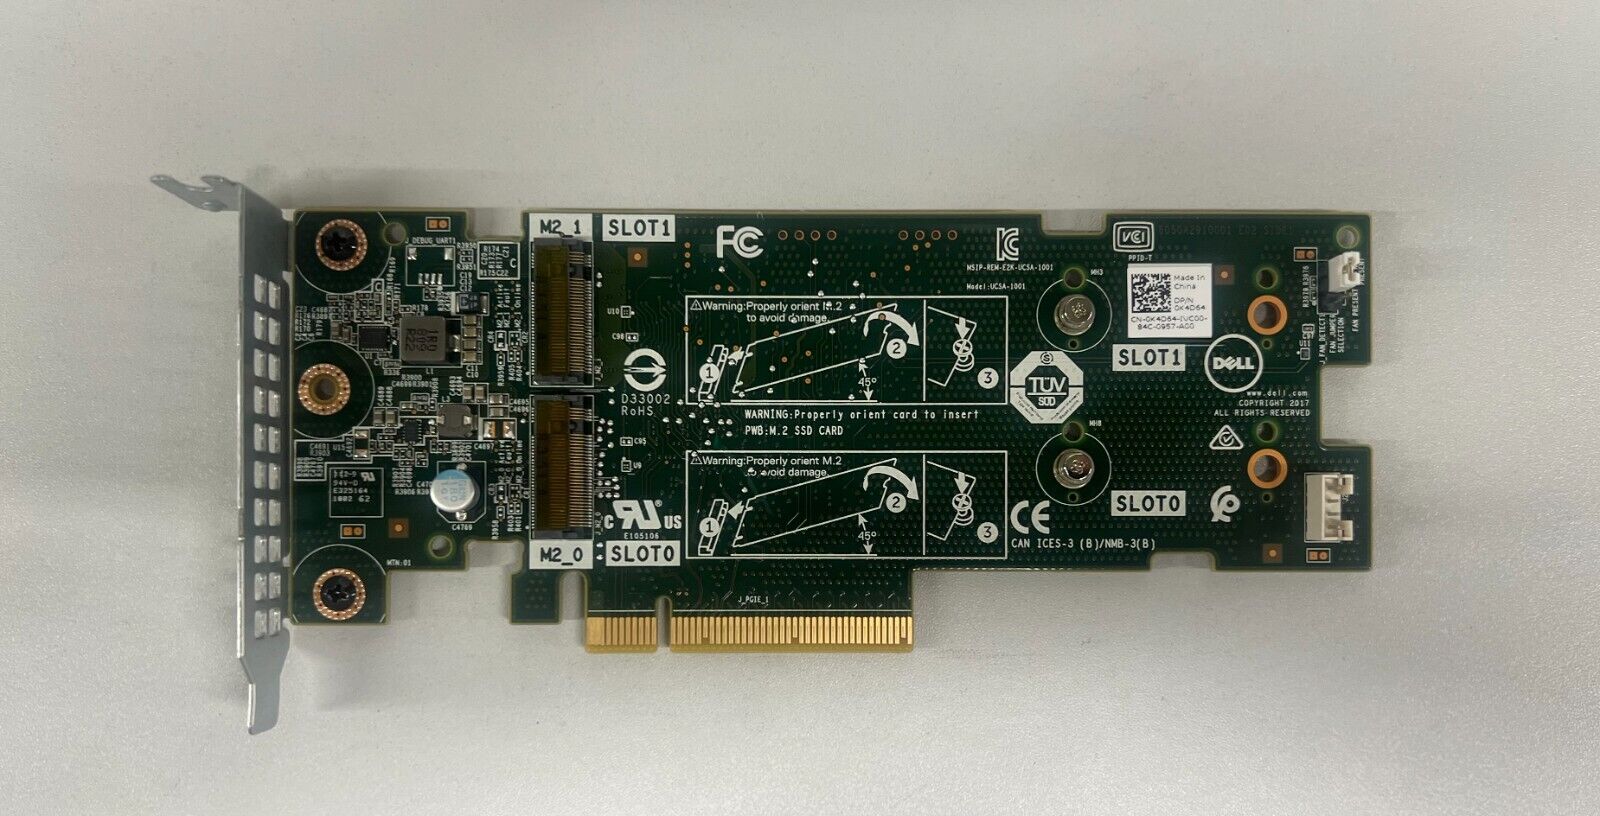 K4D64 DELL PCIE 2x M.2 SLOTS BOSS-S1 STORAGE ADAPTER CARD